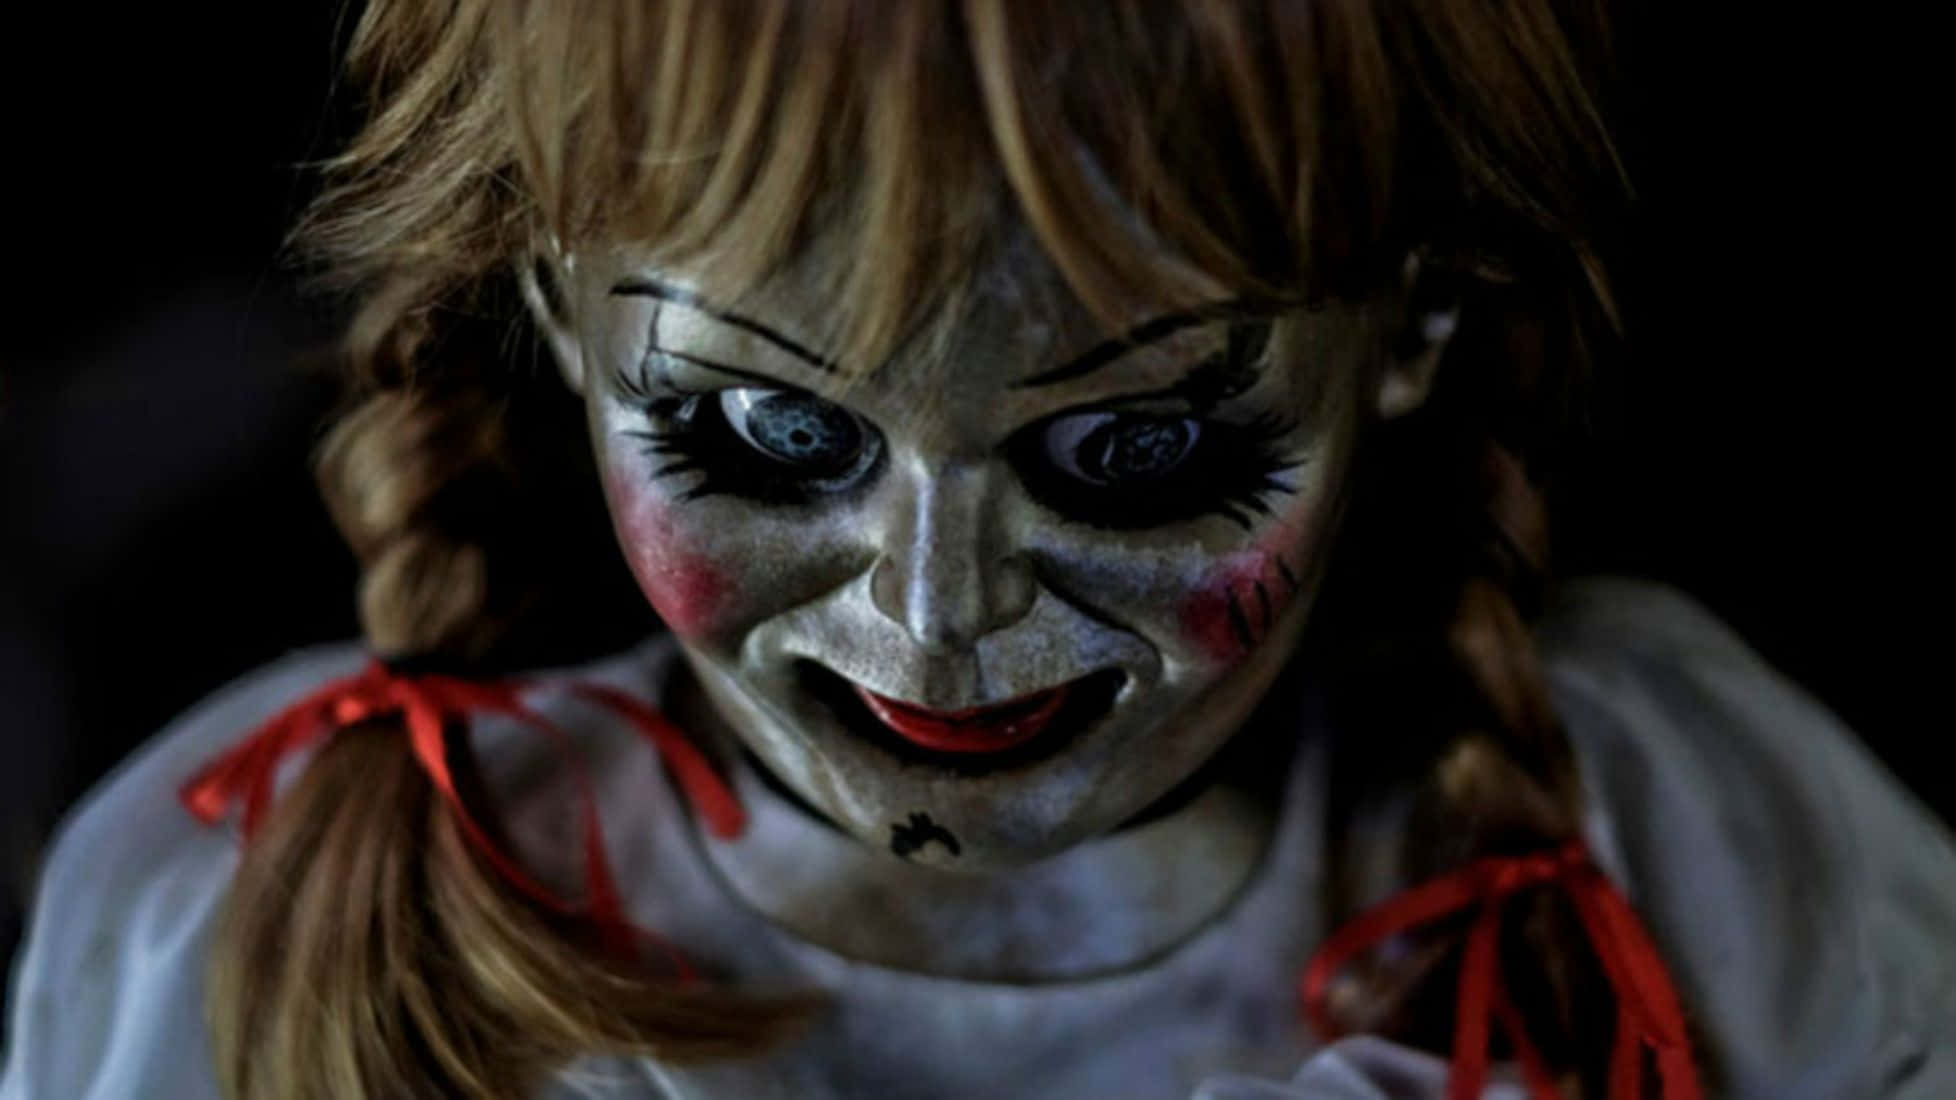 Be afraid of the most terrifying horror movie character - Annabelle.